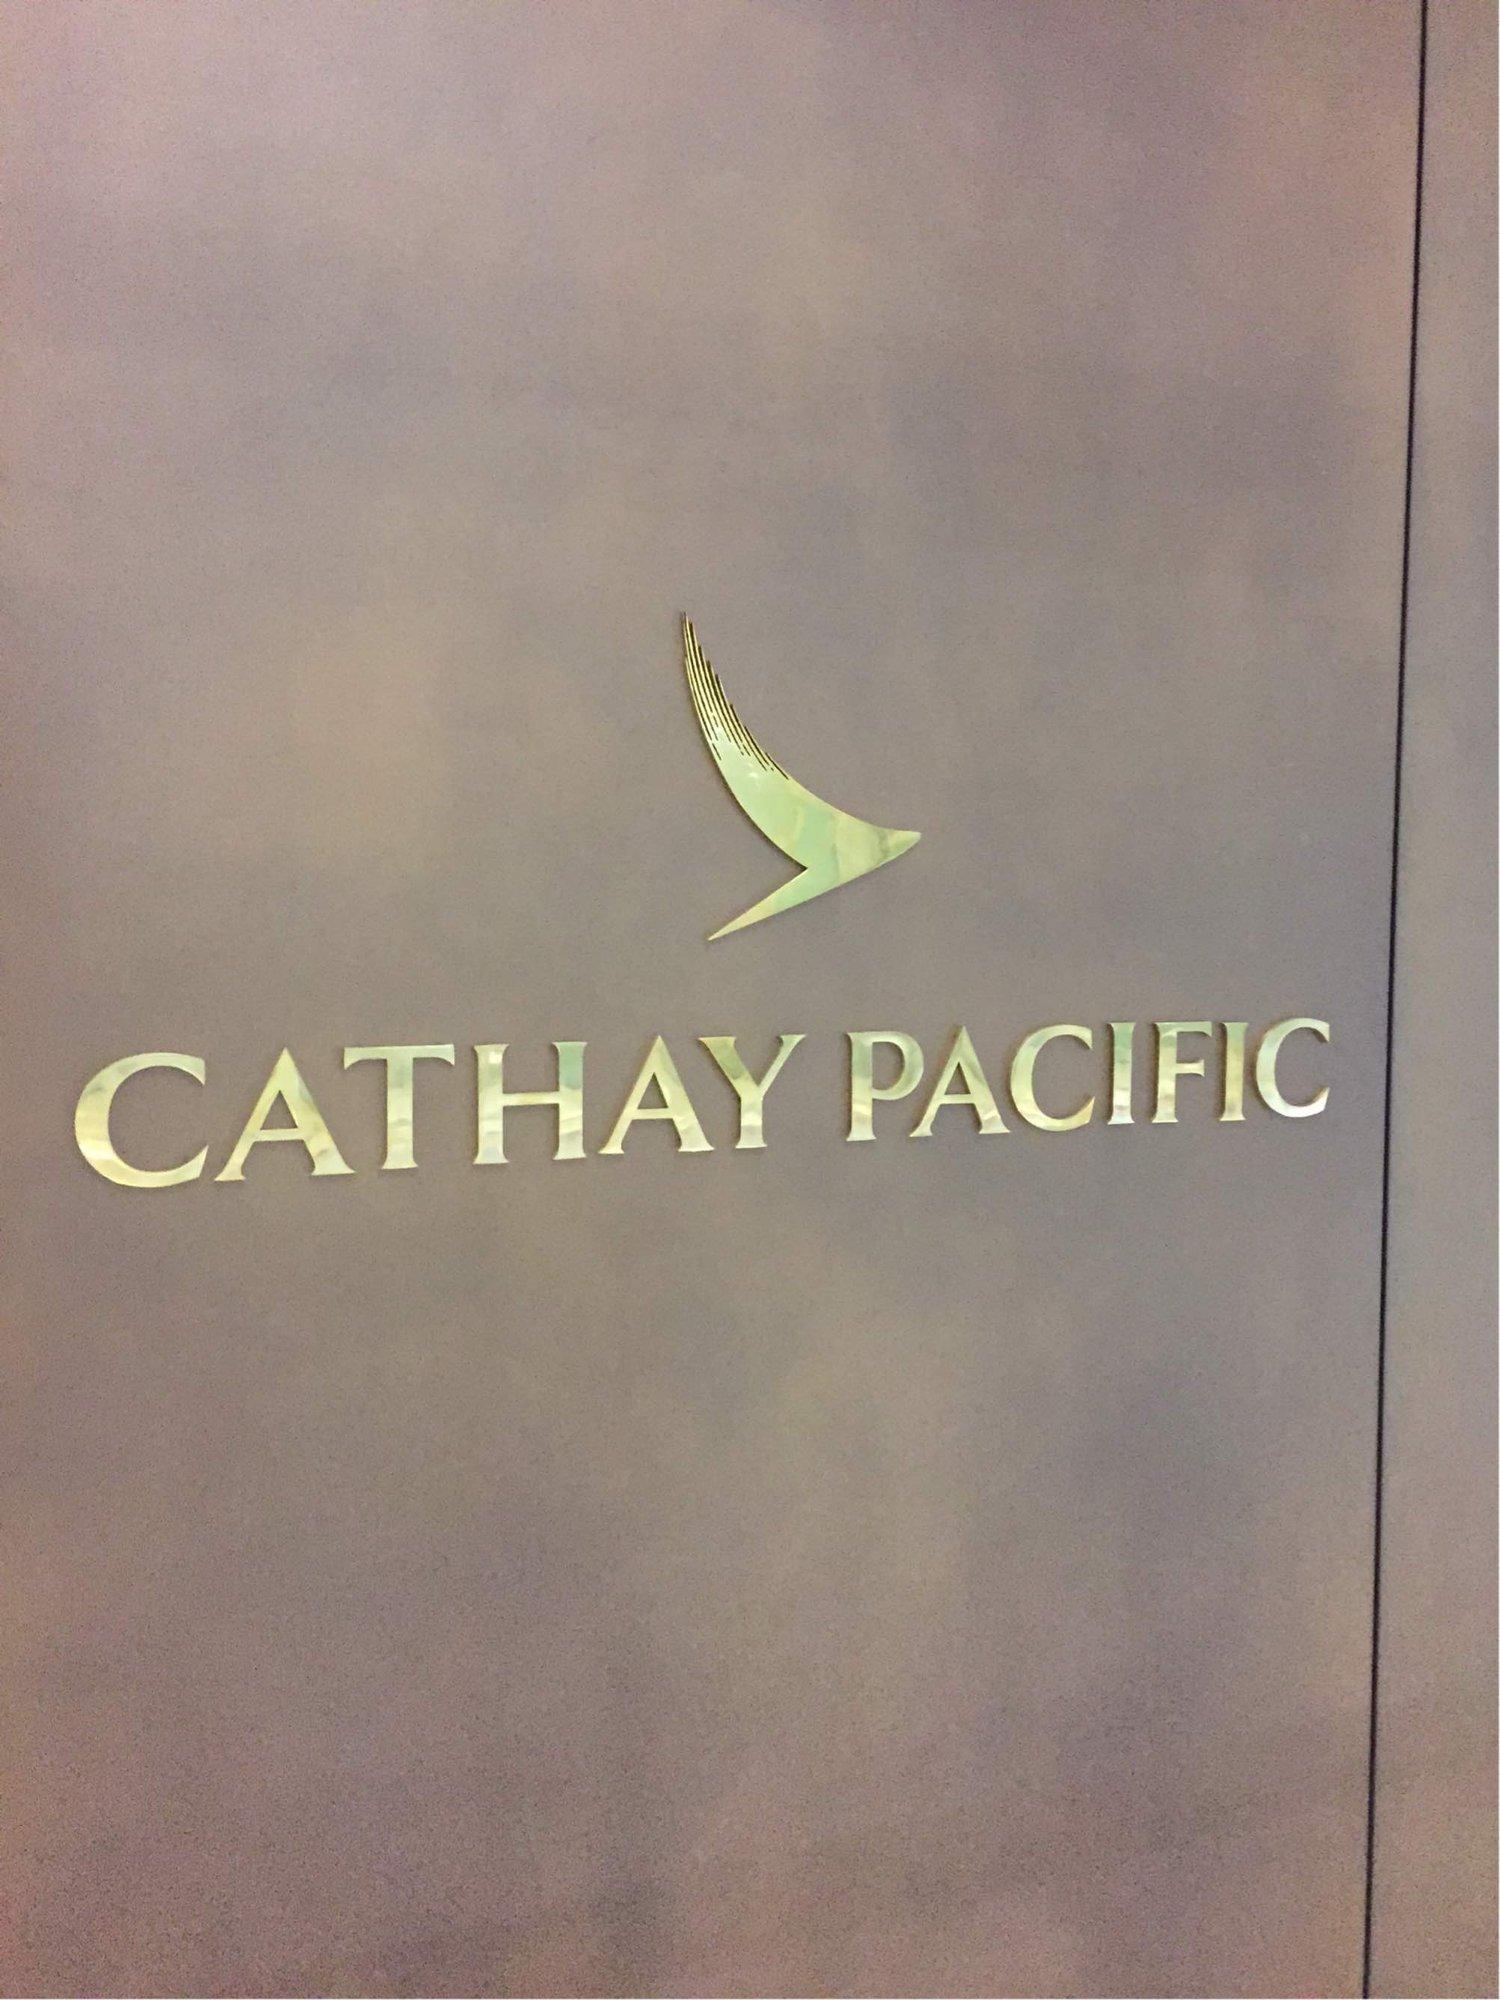 Cathay Pacific First and Business Class Lounge image 22 of 69